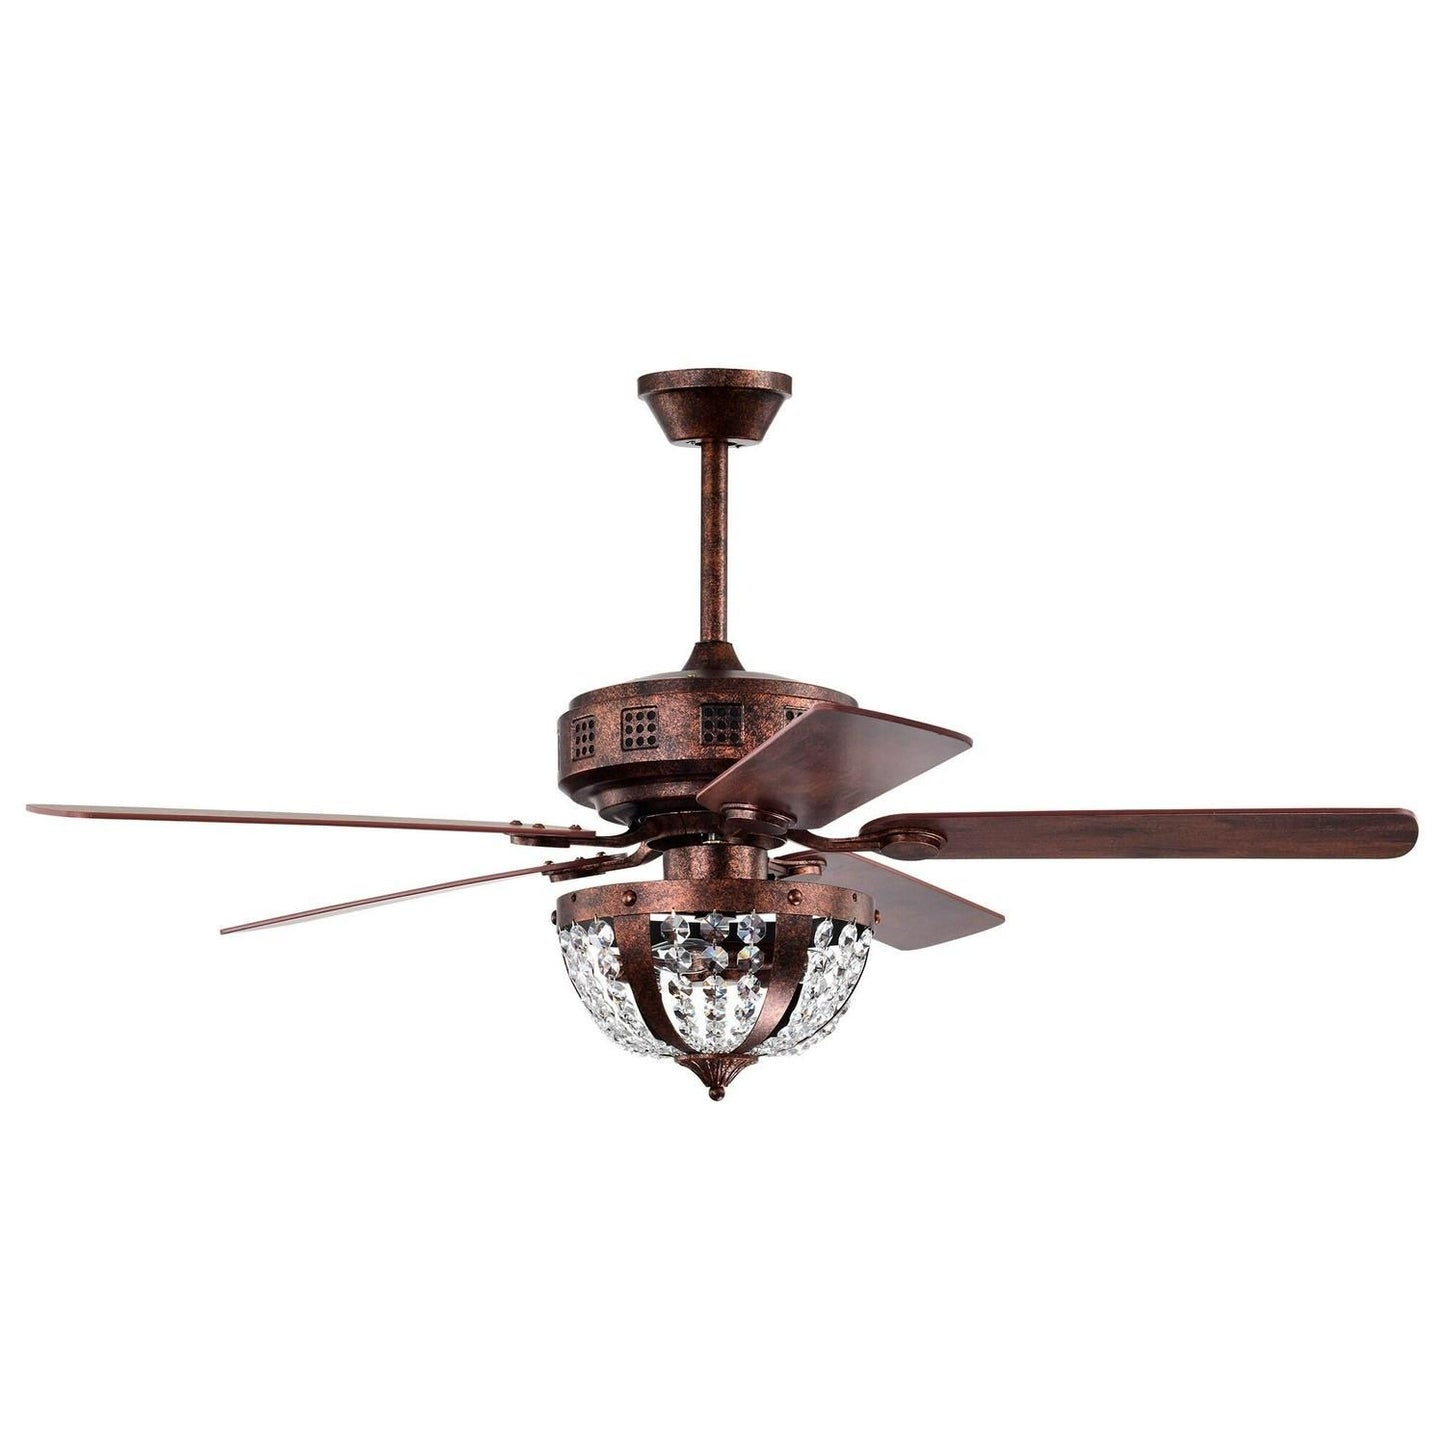 Vintage Industrial Style Antique Copper Finish Ceiling Fan Light with Remote